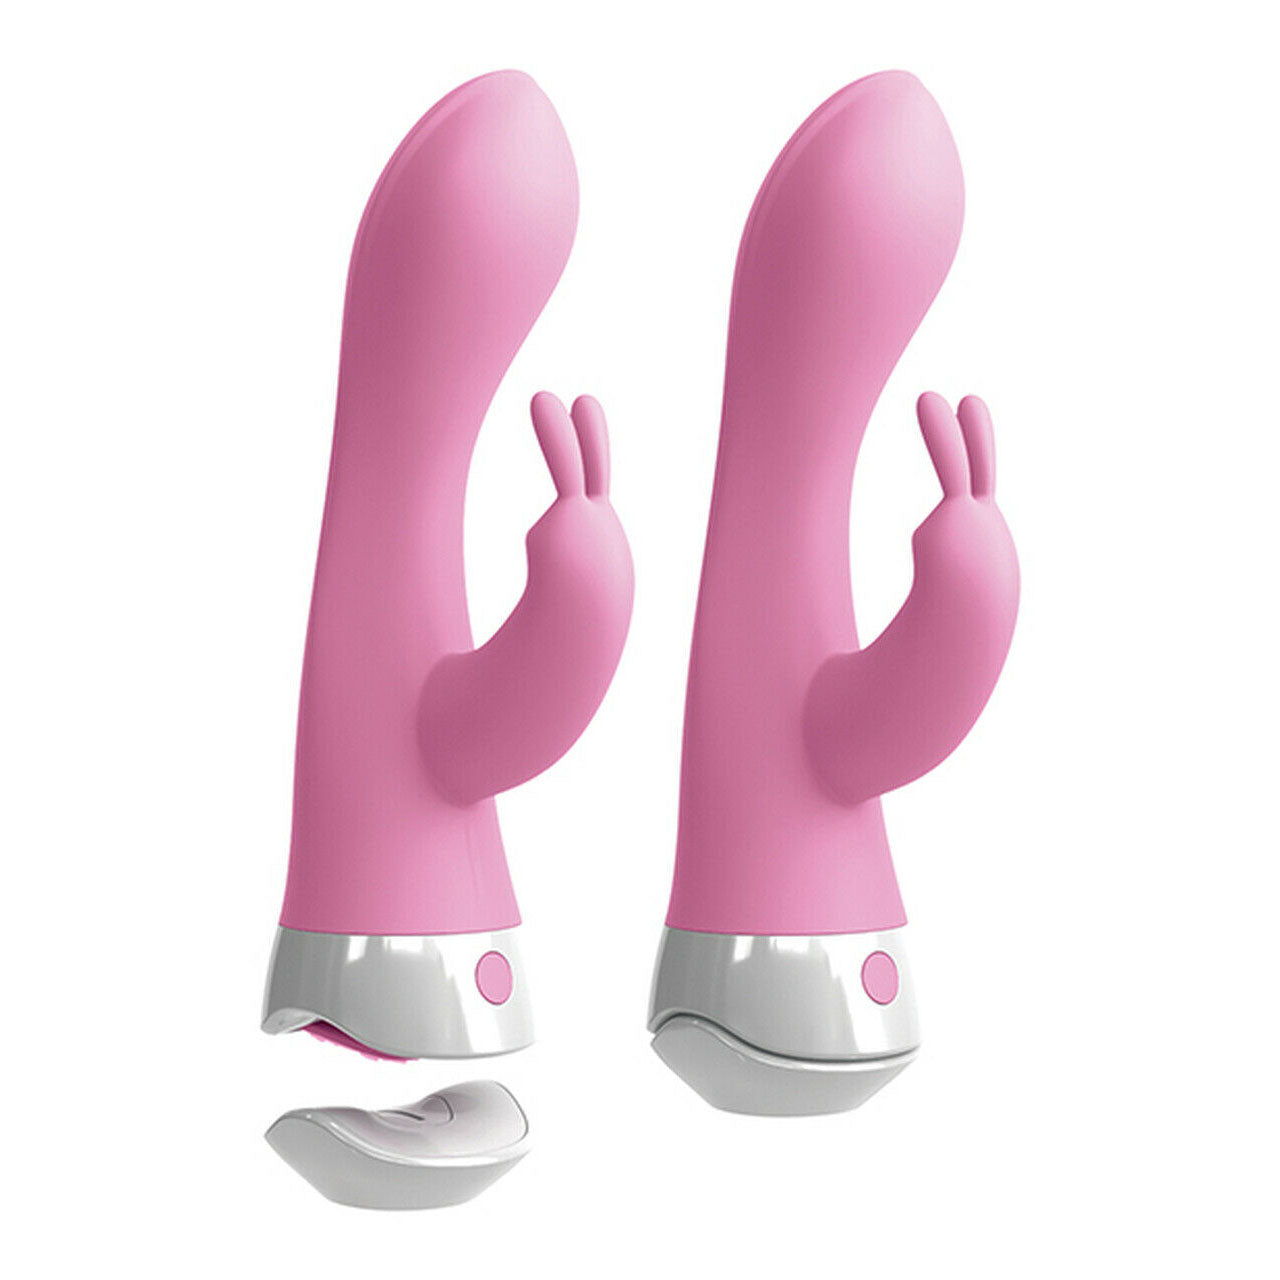 Vibrators, Sex Toy Kits and Sex Toys at Cloud9Adults - 3Some Wall Banger Rabbit Vibe - Buy Sex Toys Online